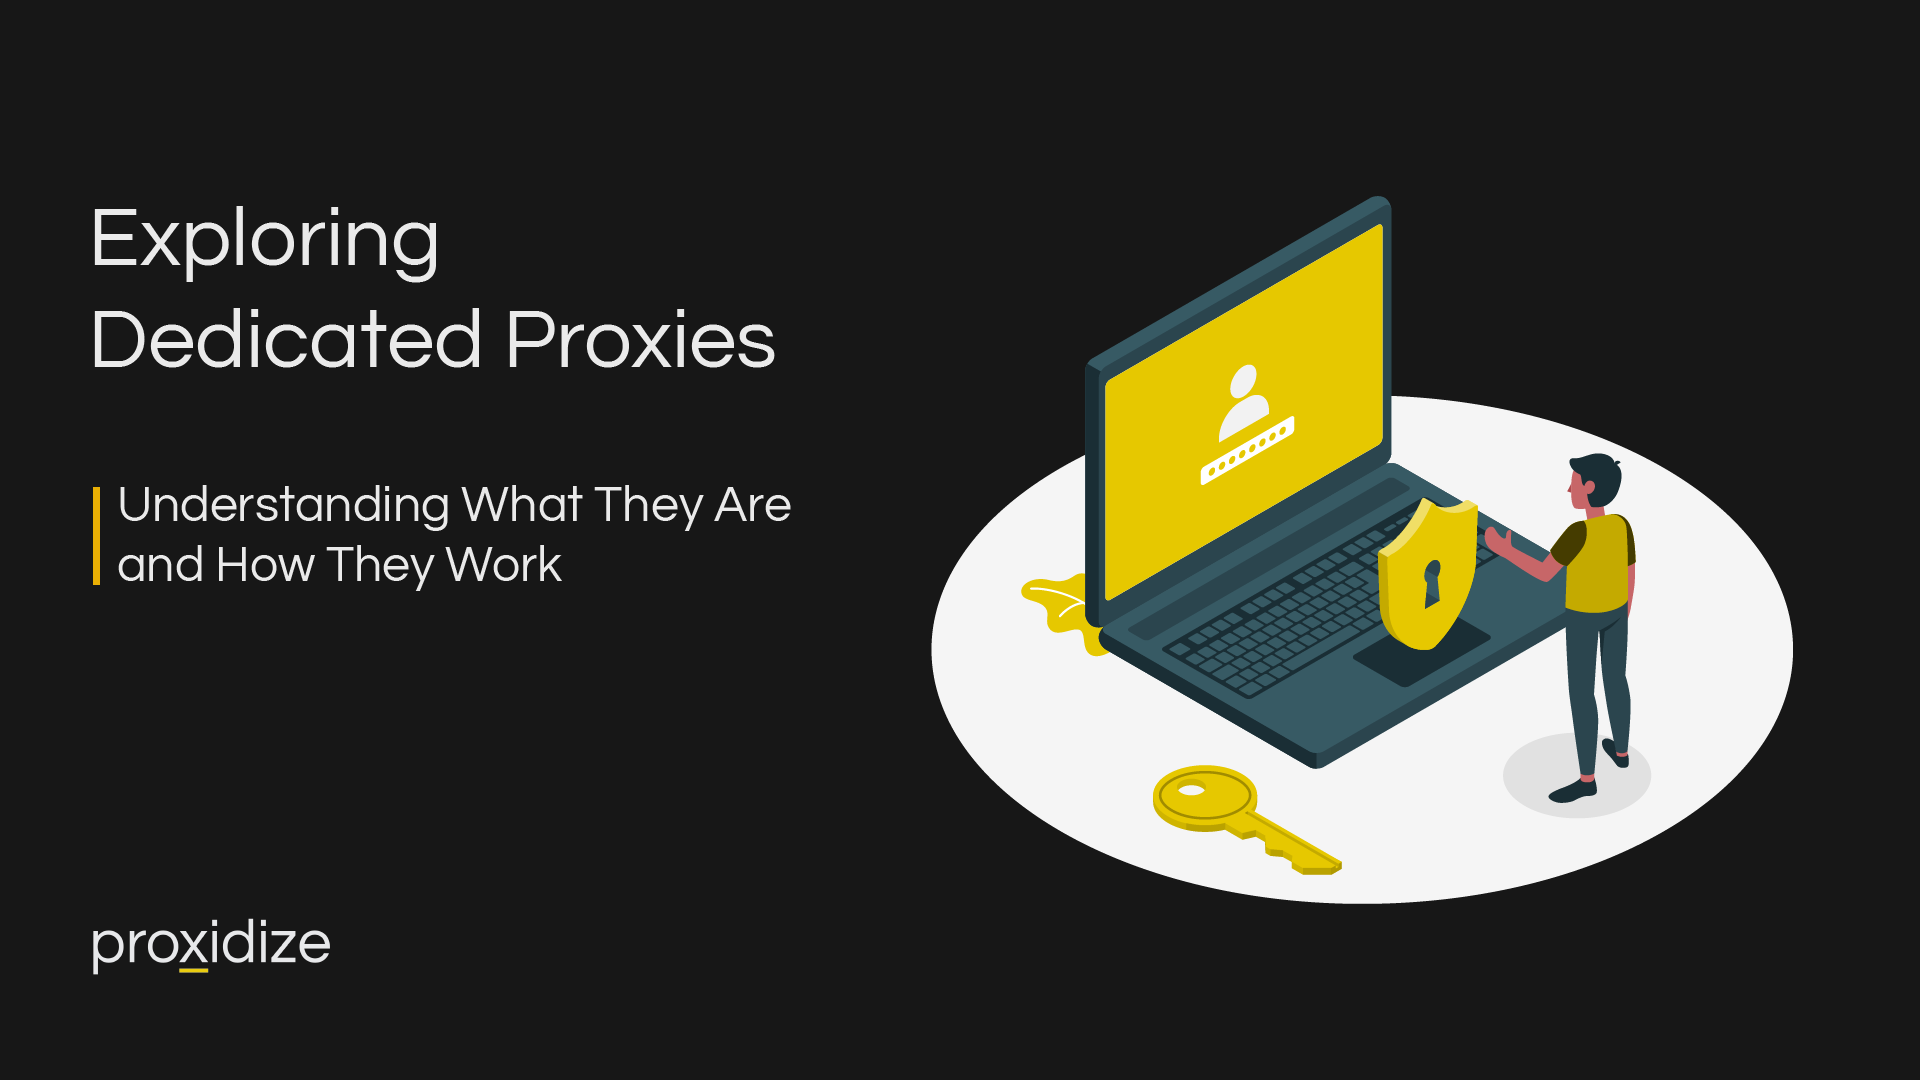 what is a dedicated proxy